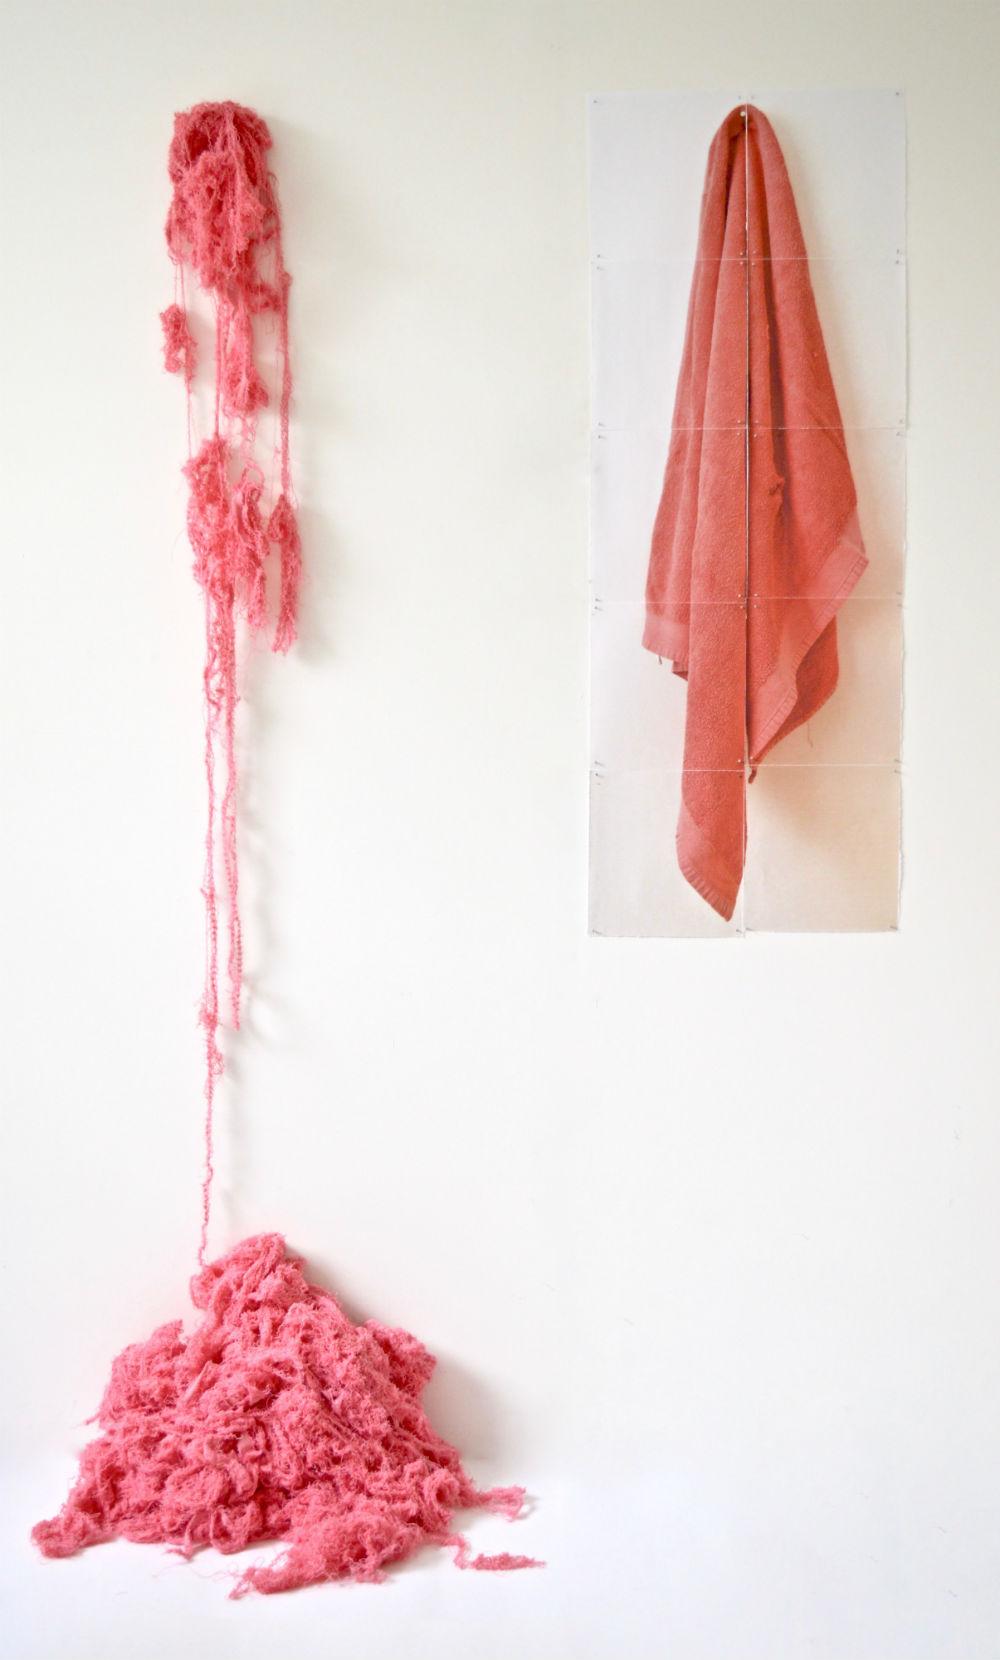 Poppy Jones-Little, the lump of stuff which makes her up, deconstructed towel with image of ripped towel, 59.4 x 104.2 x 131 cm, 2020